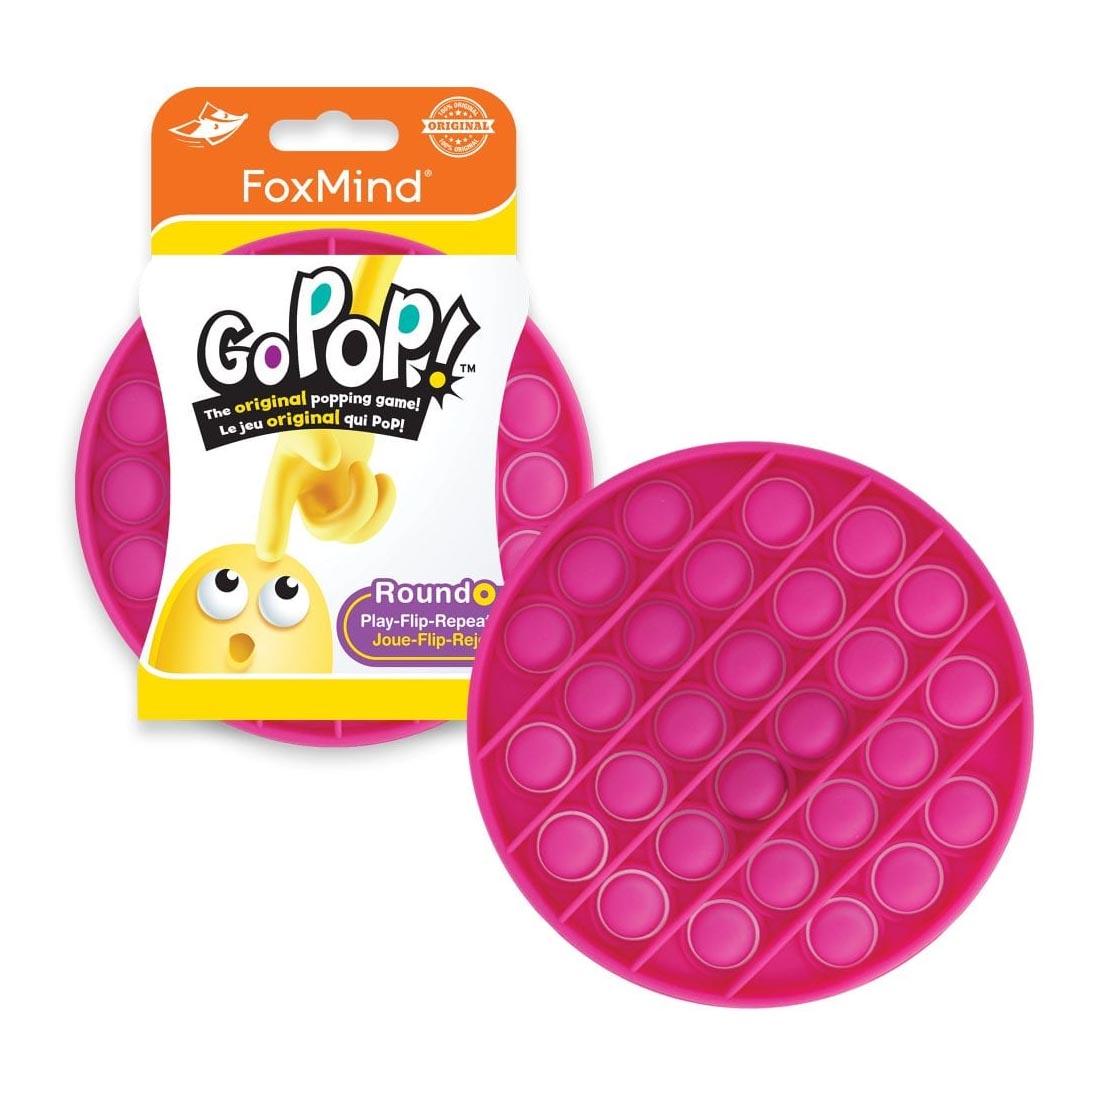 Go PoP! Roundo Pink shown both with and without packaging